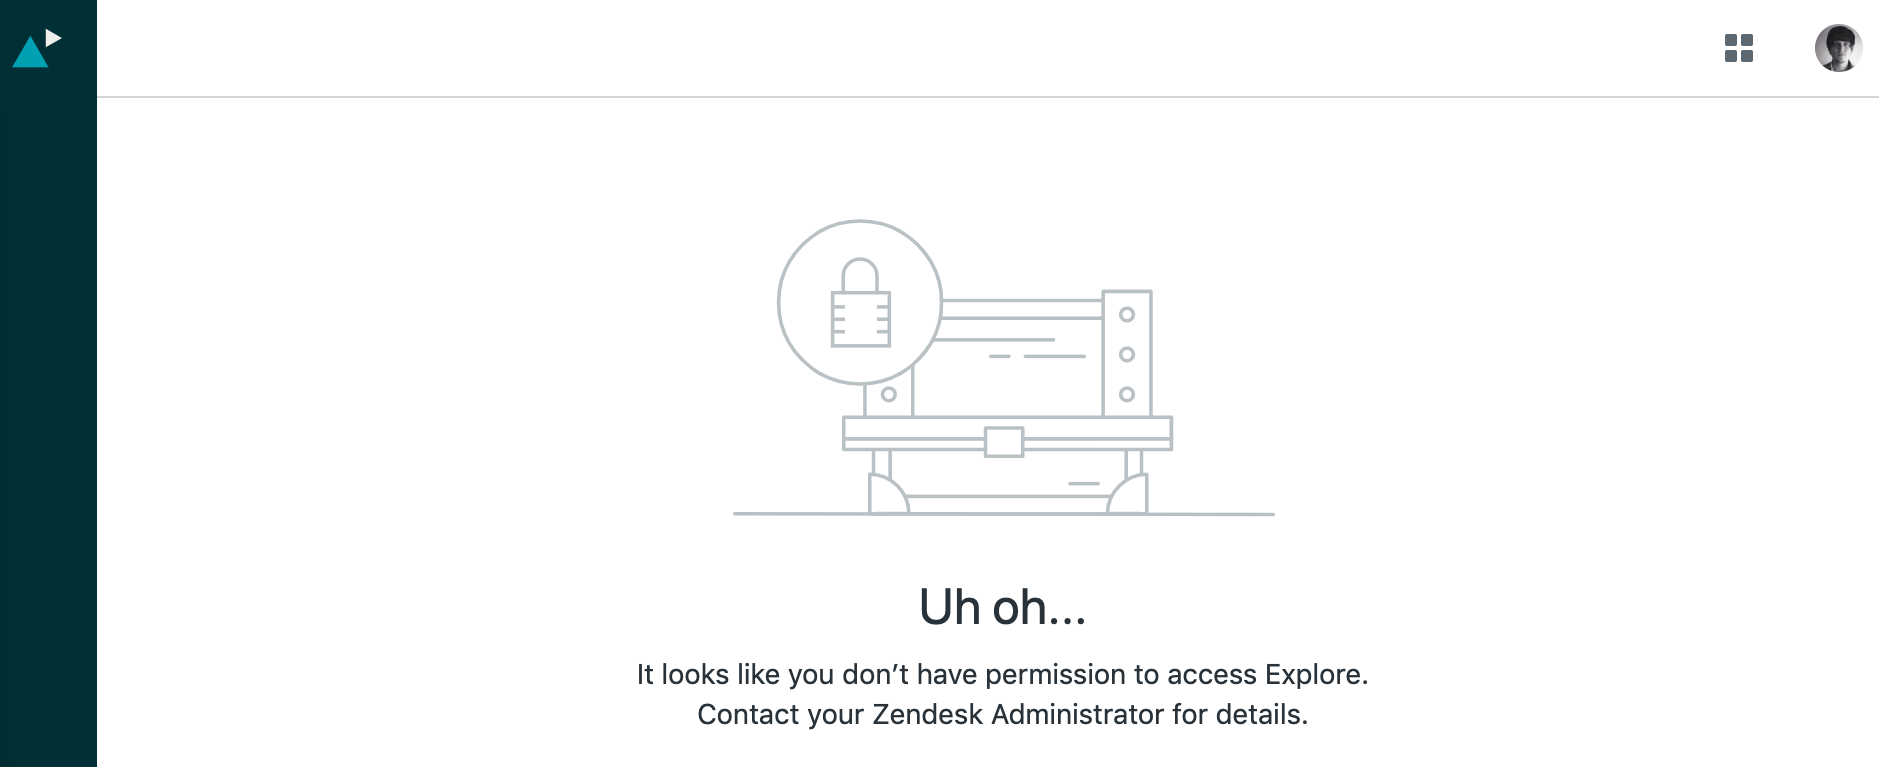 uh_eh_it_looks_like_you_dont_have_permission_to_access_explore.png